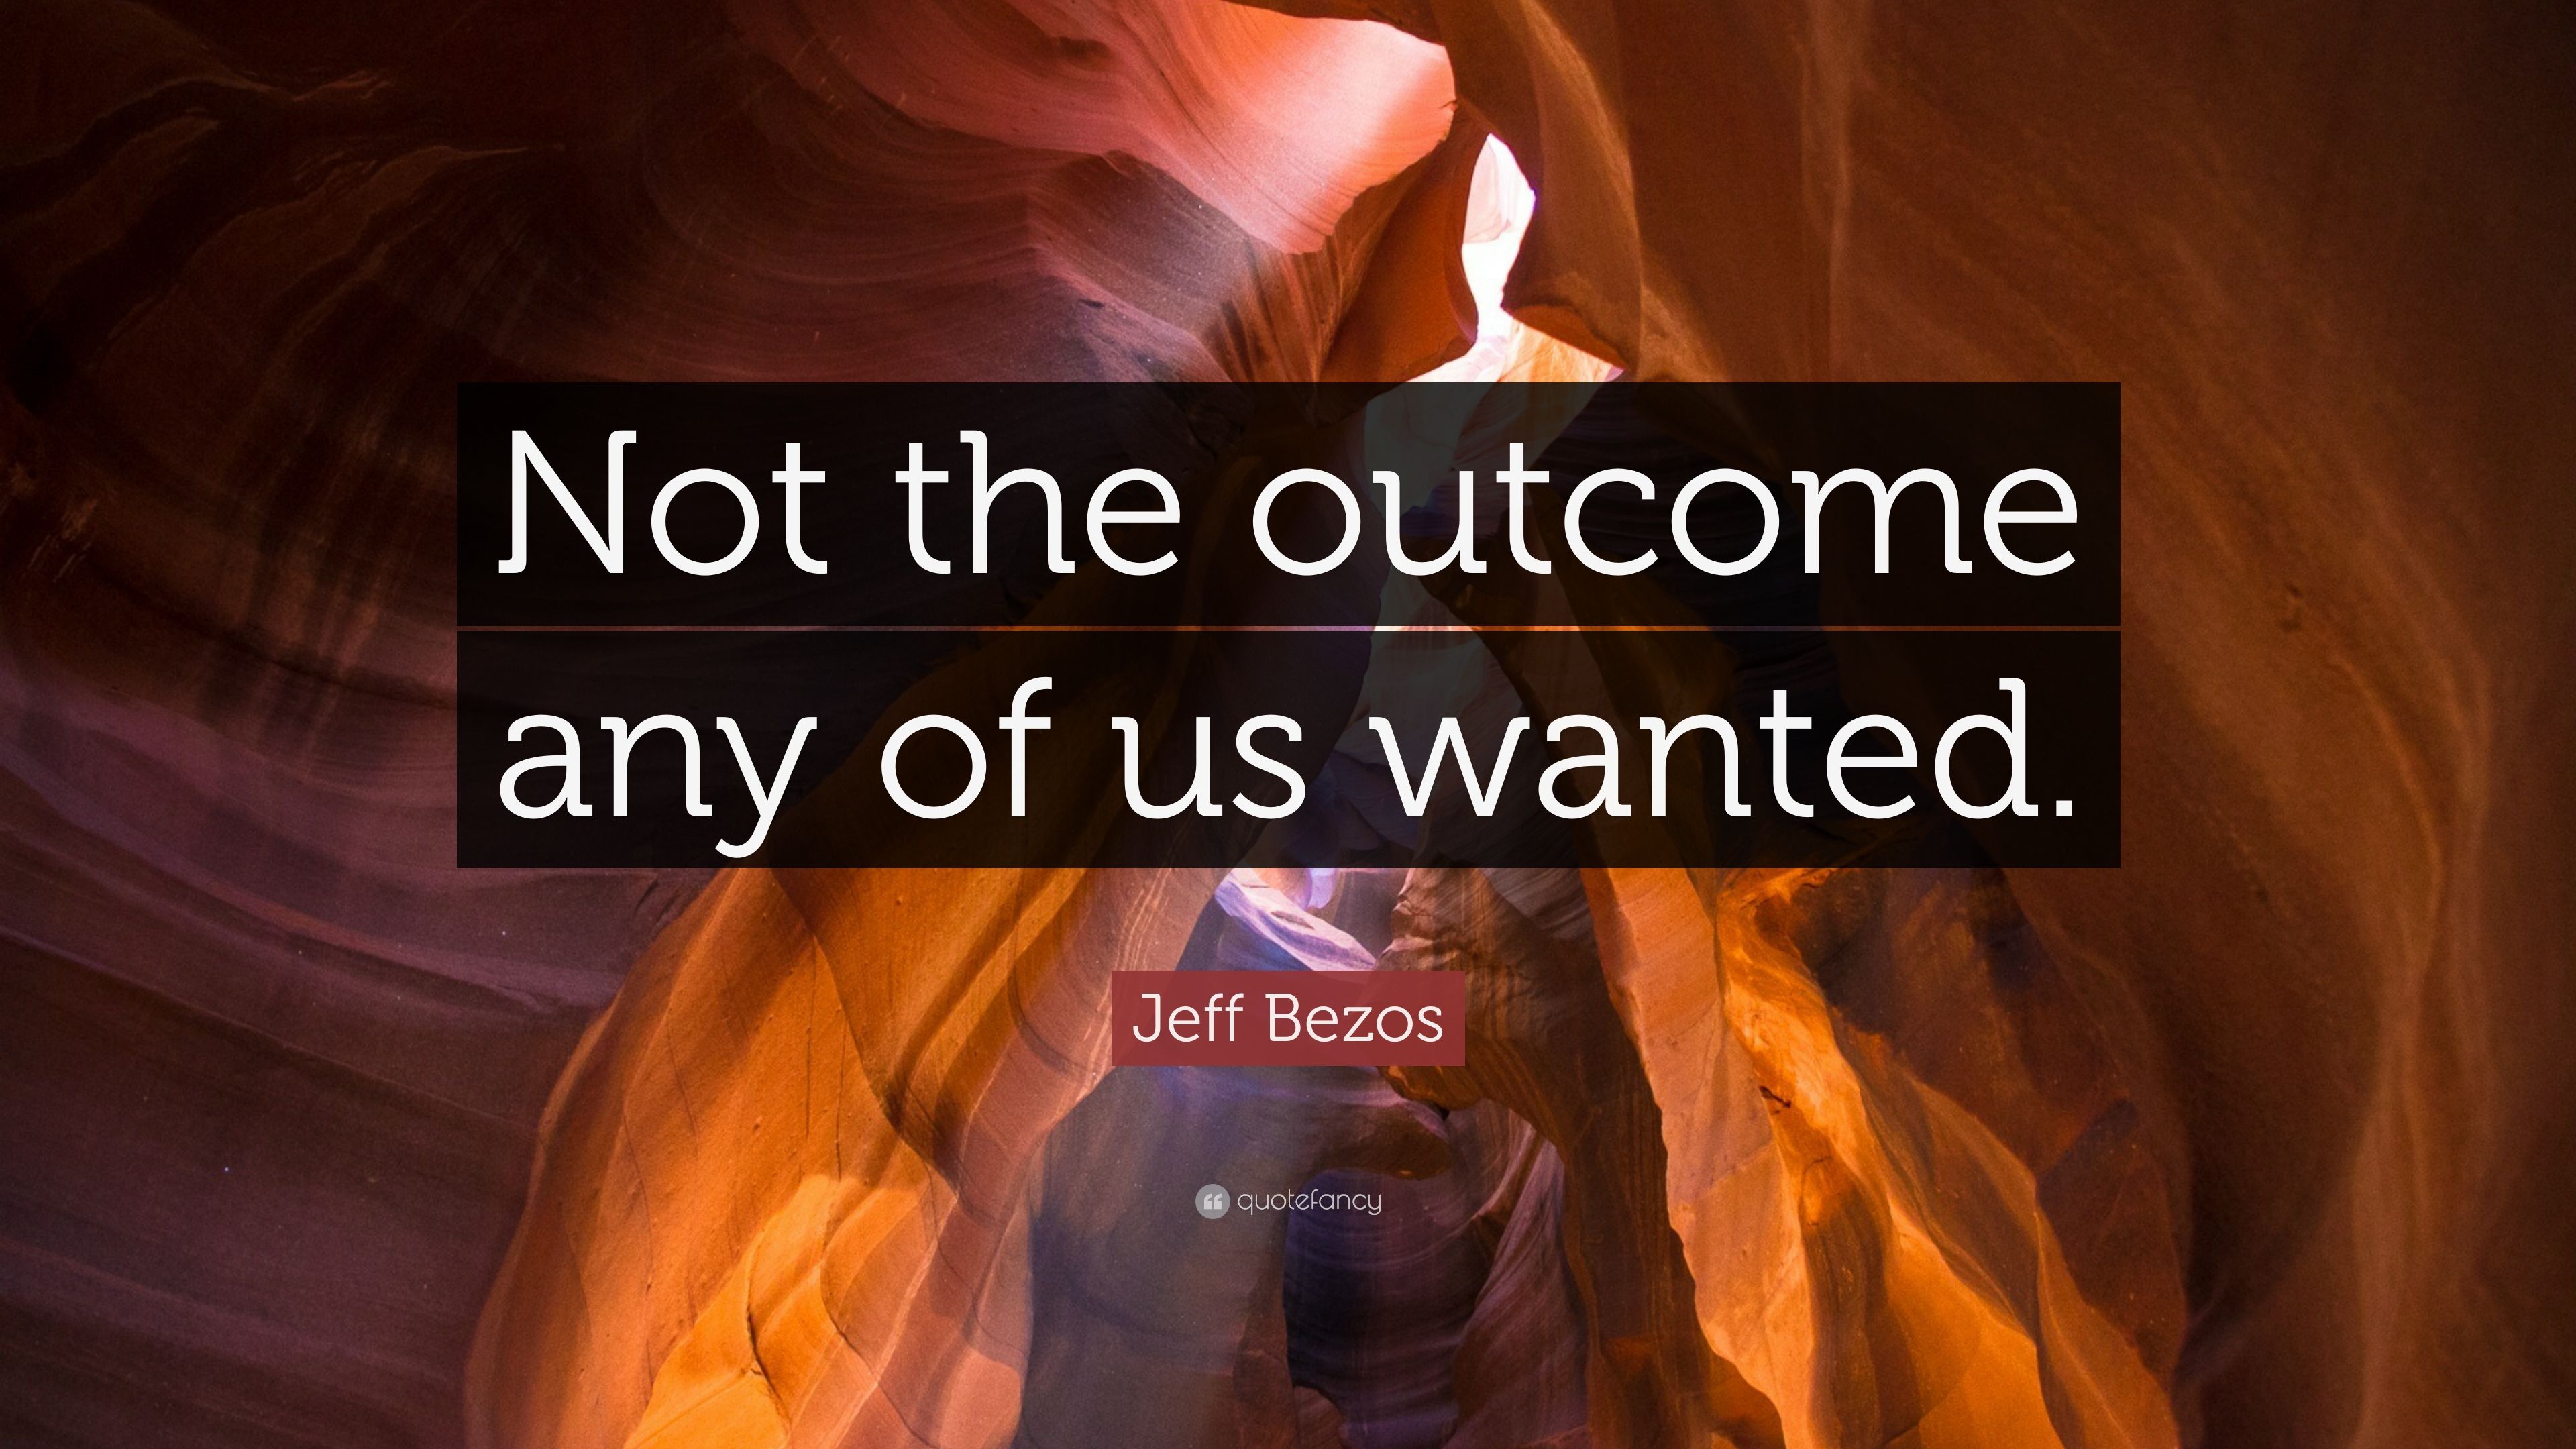 Jeff Bezos Quote: “Not the outcome any of us wanted.” (10 wallpaper)